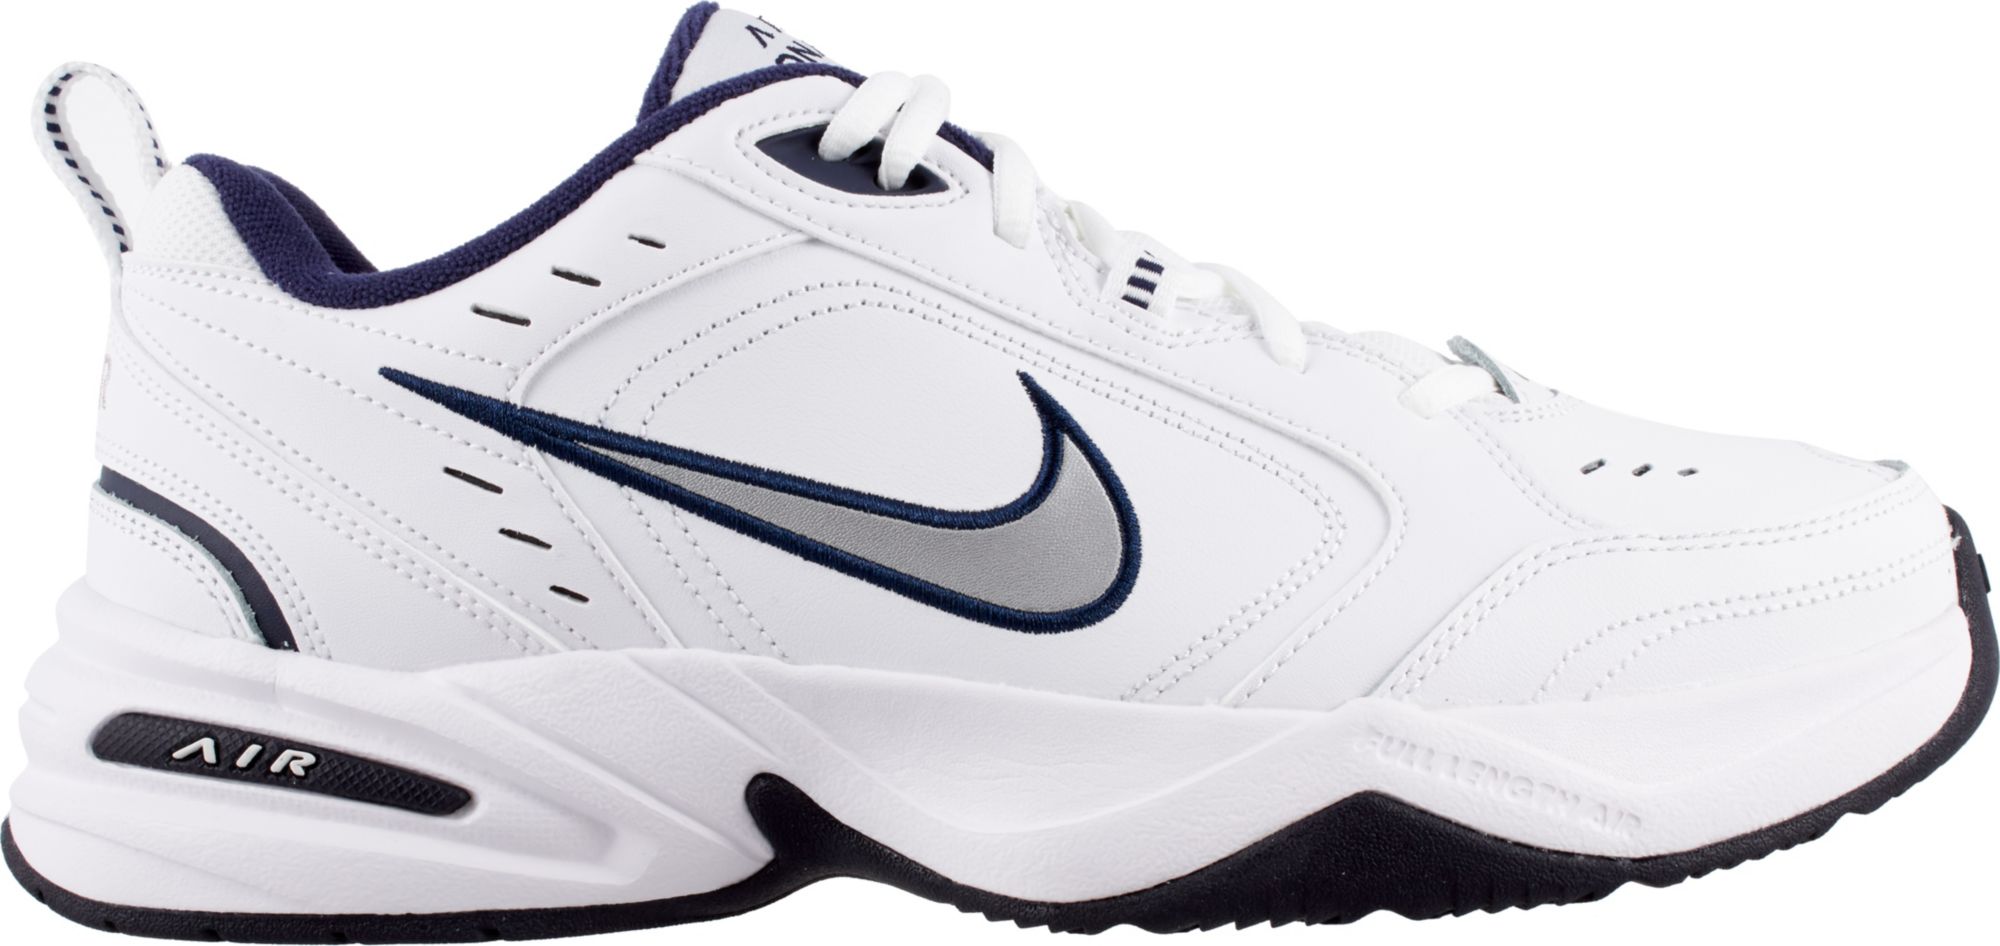 PAUSE’s Sneaker of the Week: The Nike Air Monarch IV